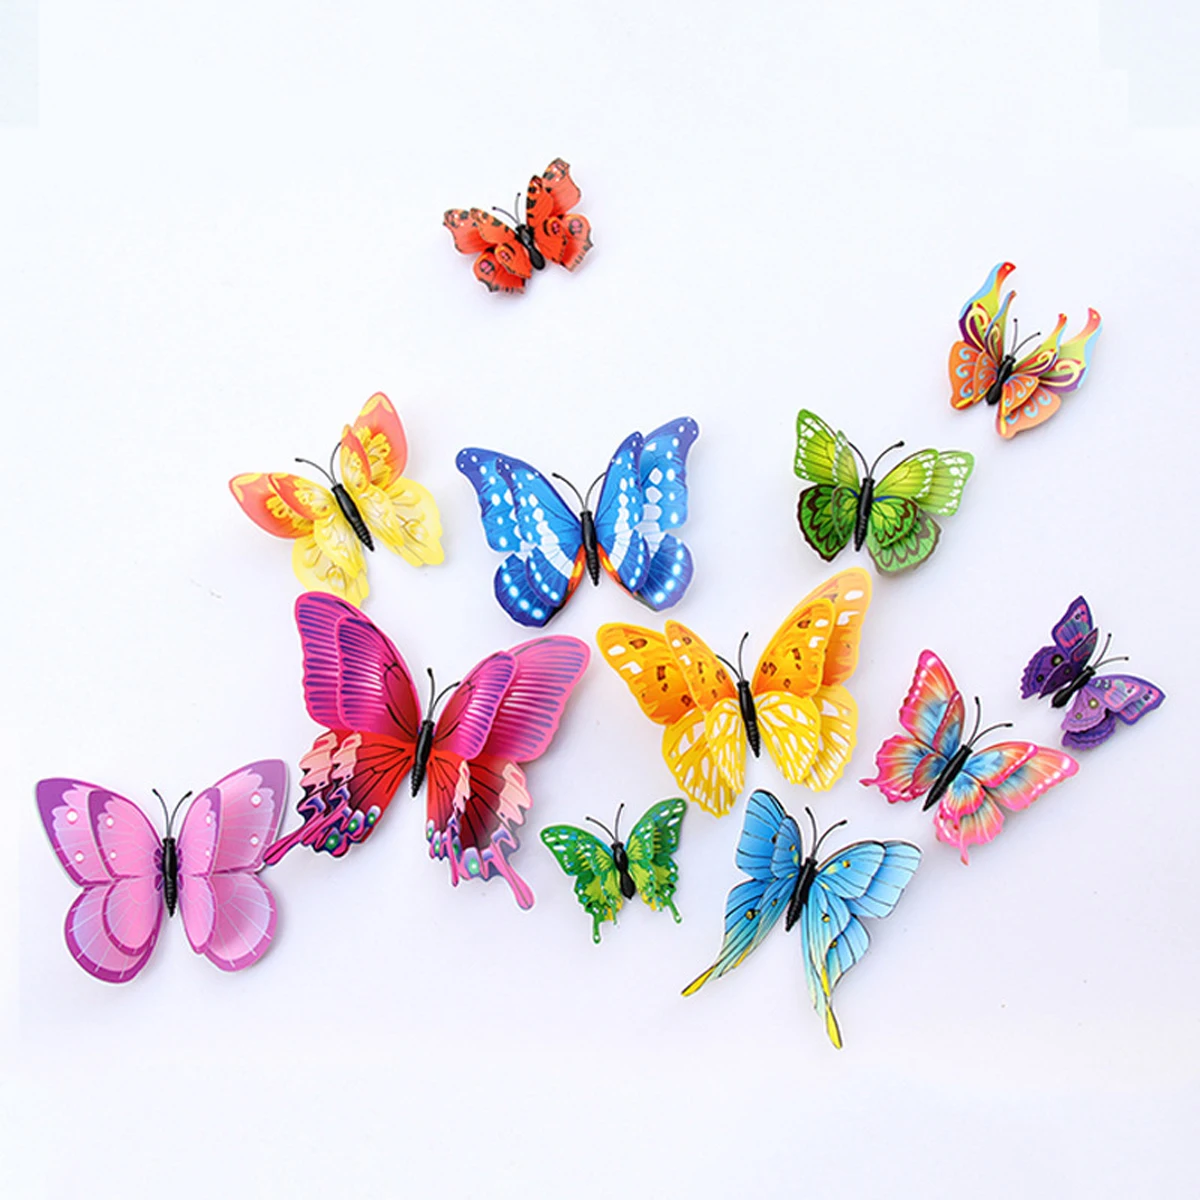 12 Piece 3D PVC Wall Stickers Magnet Double-Layer Butterfly Decor, Simulation Stereo Wall Sticker DIY Home Decor Poster Bar Bathroom Kitchen